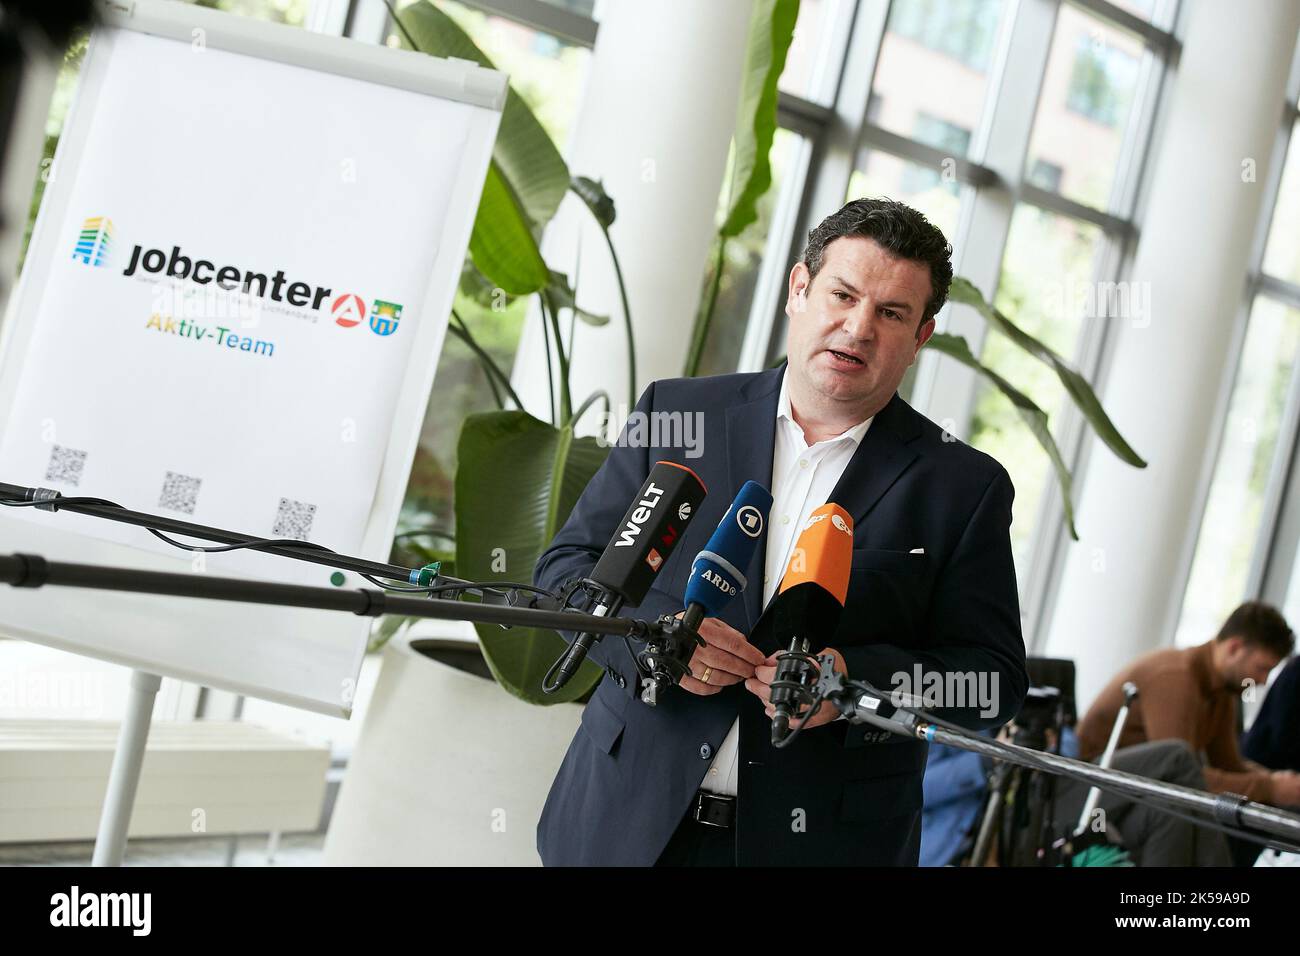 14.09.2022, Germany, Berlin, Berlin - Federal Minister Hubertus Heil informs at a press meeting in the Jobcenter Berlin Lichtenberg about the passed C Stock Photo